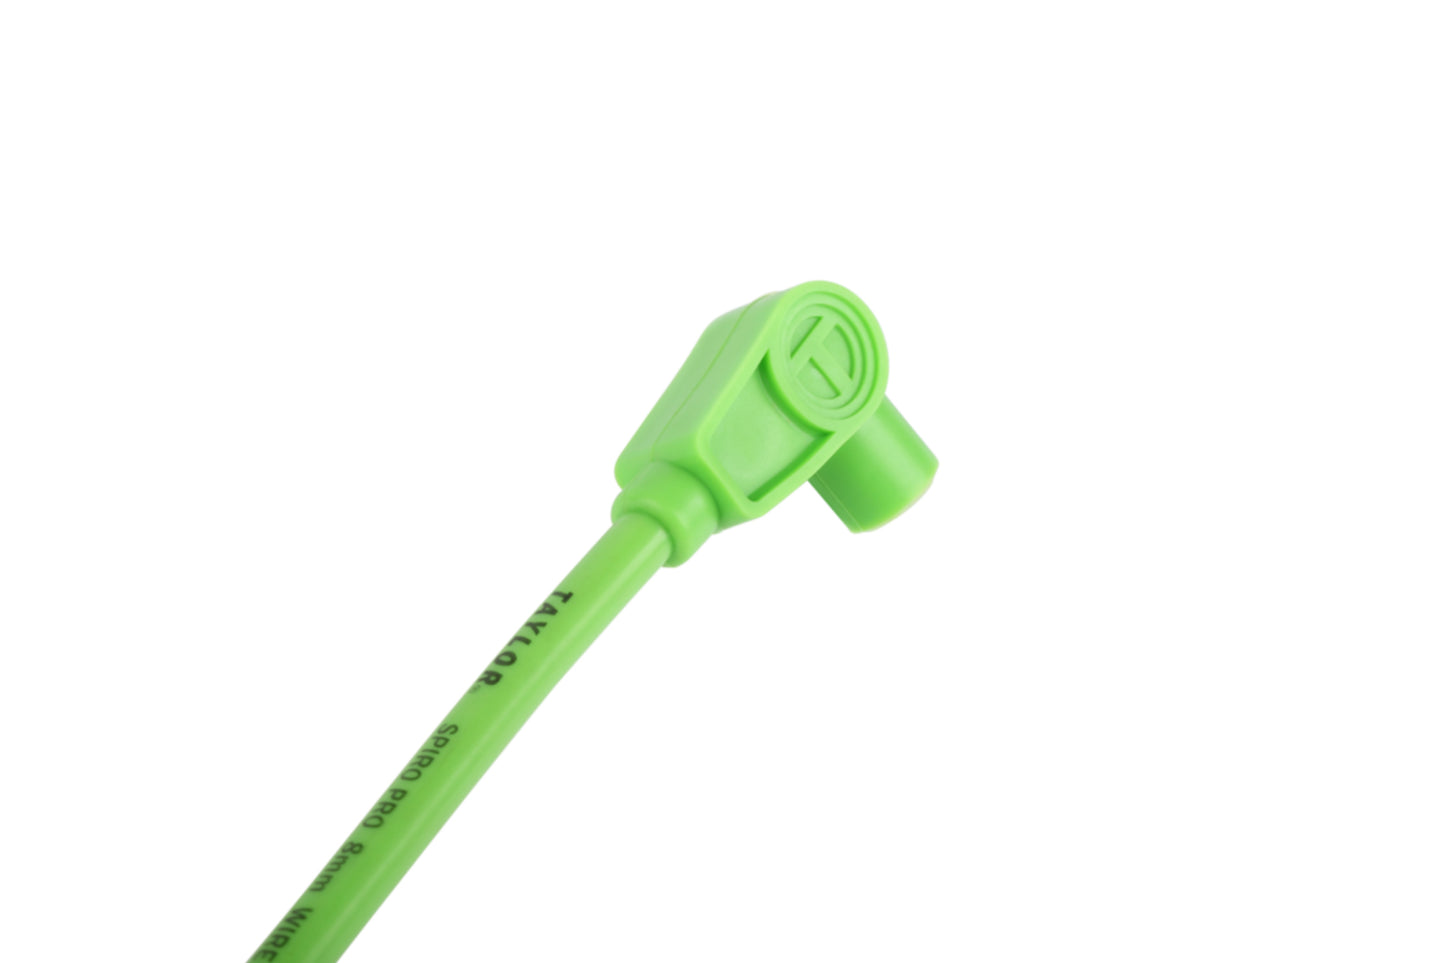 Taylor Cable 78551 8mm Spiro-Pro univ 8 cyl 90 Lime Green